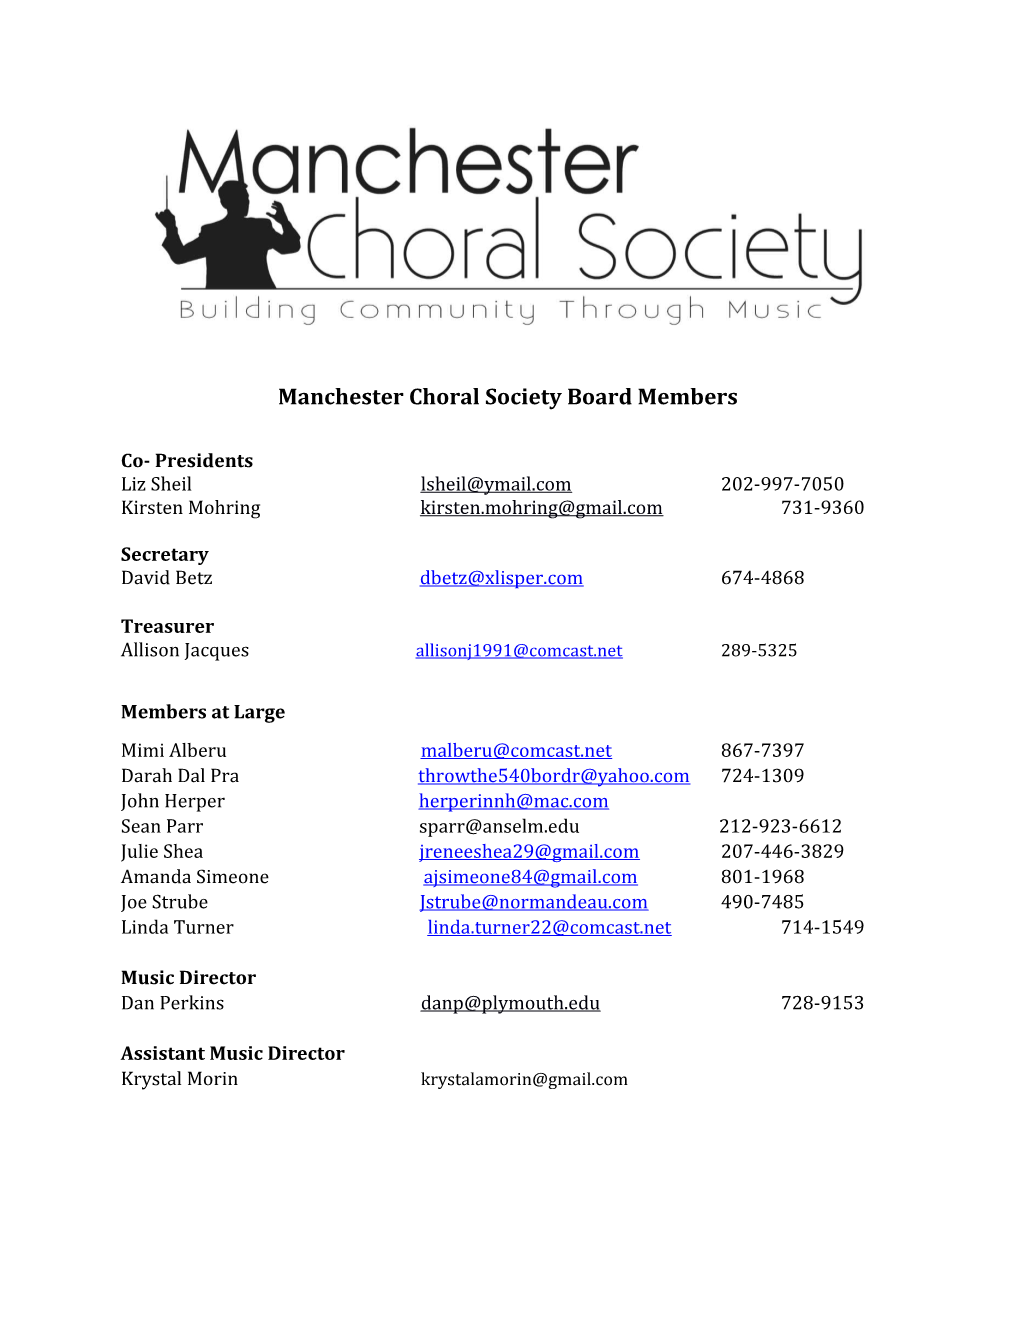 Manchester Choral Society Board Members